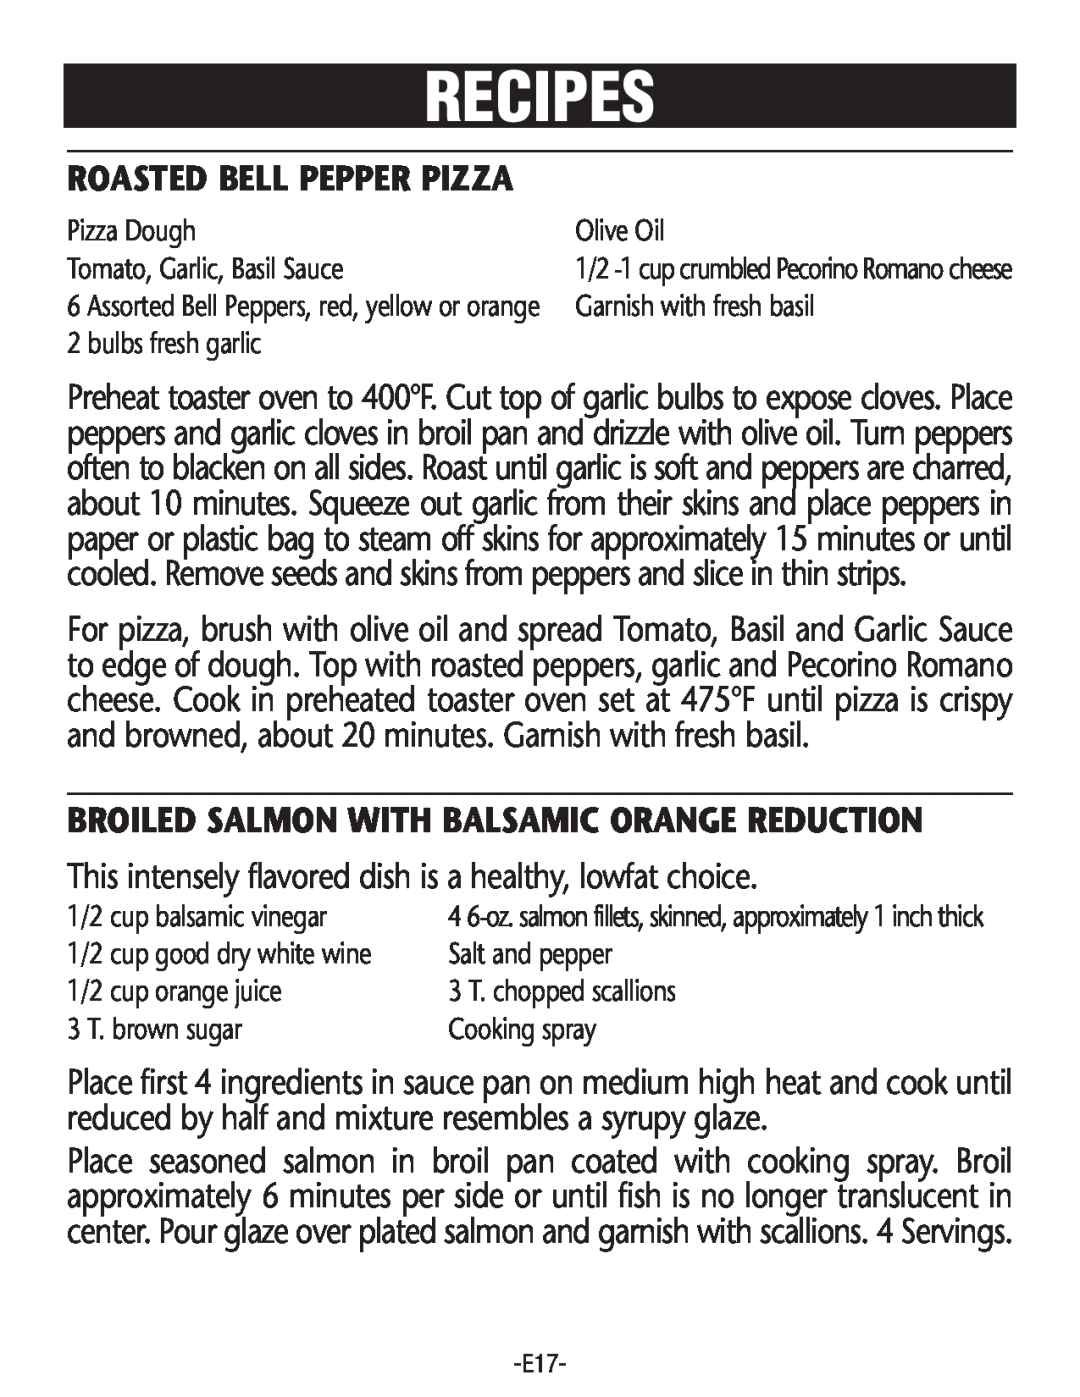 Rival CO602 manual Roasted Bell Pepper Pizza, Broiled Salmon With Balsamic Orange Reduction, Recipes 